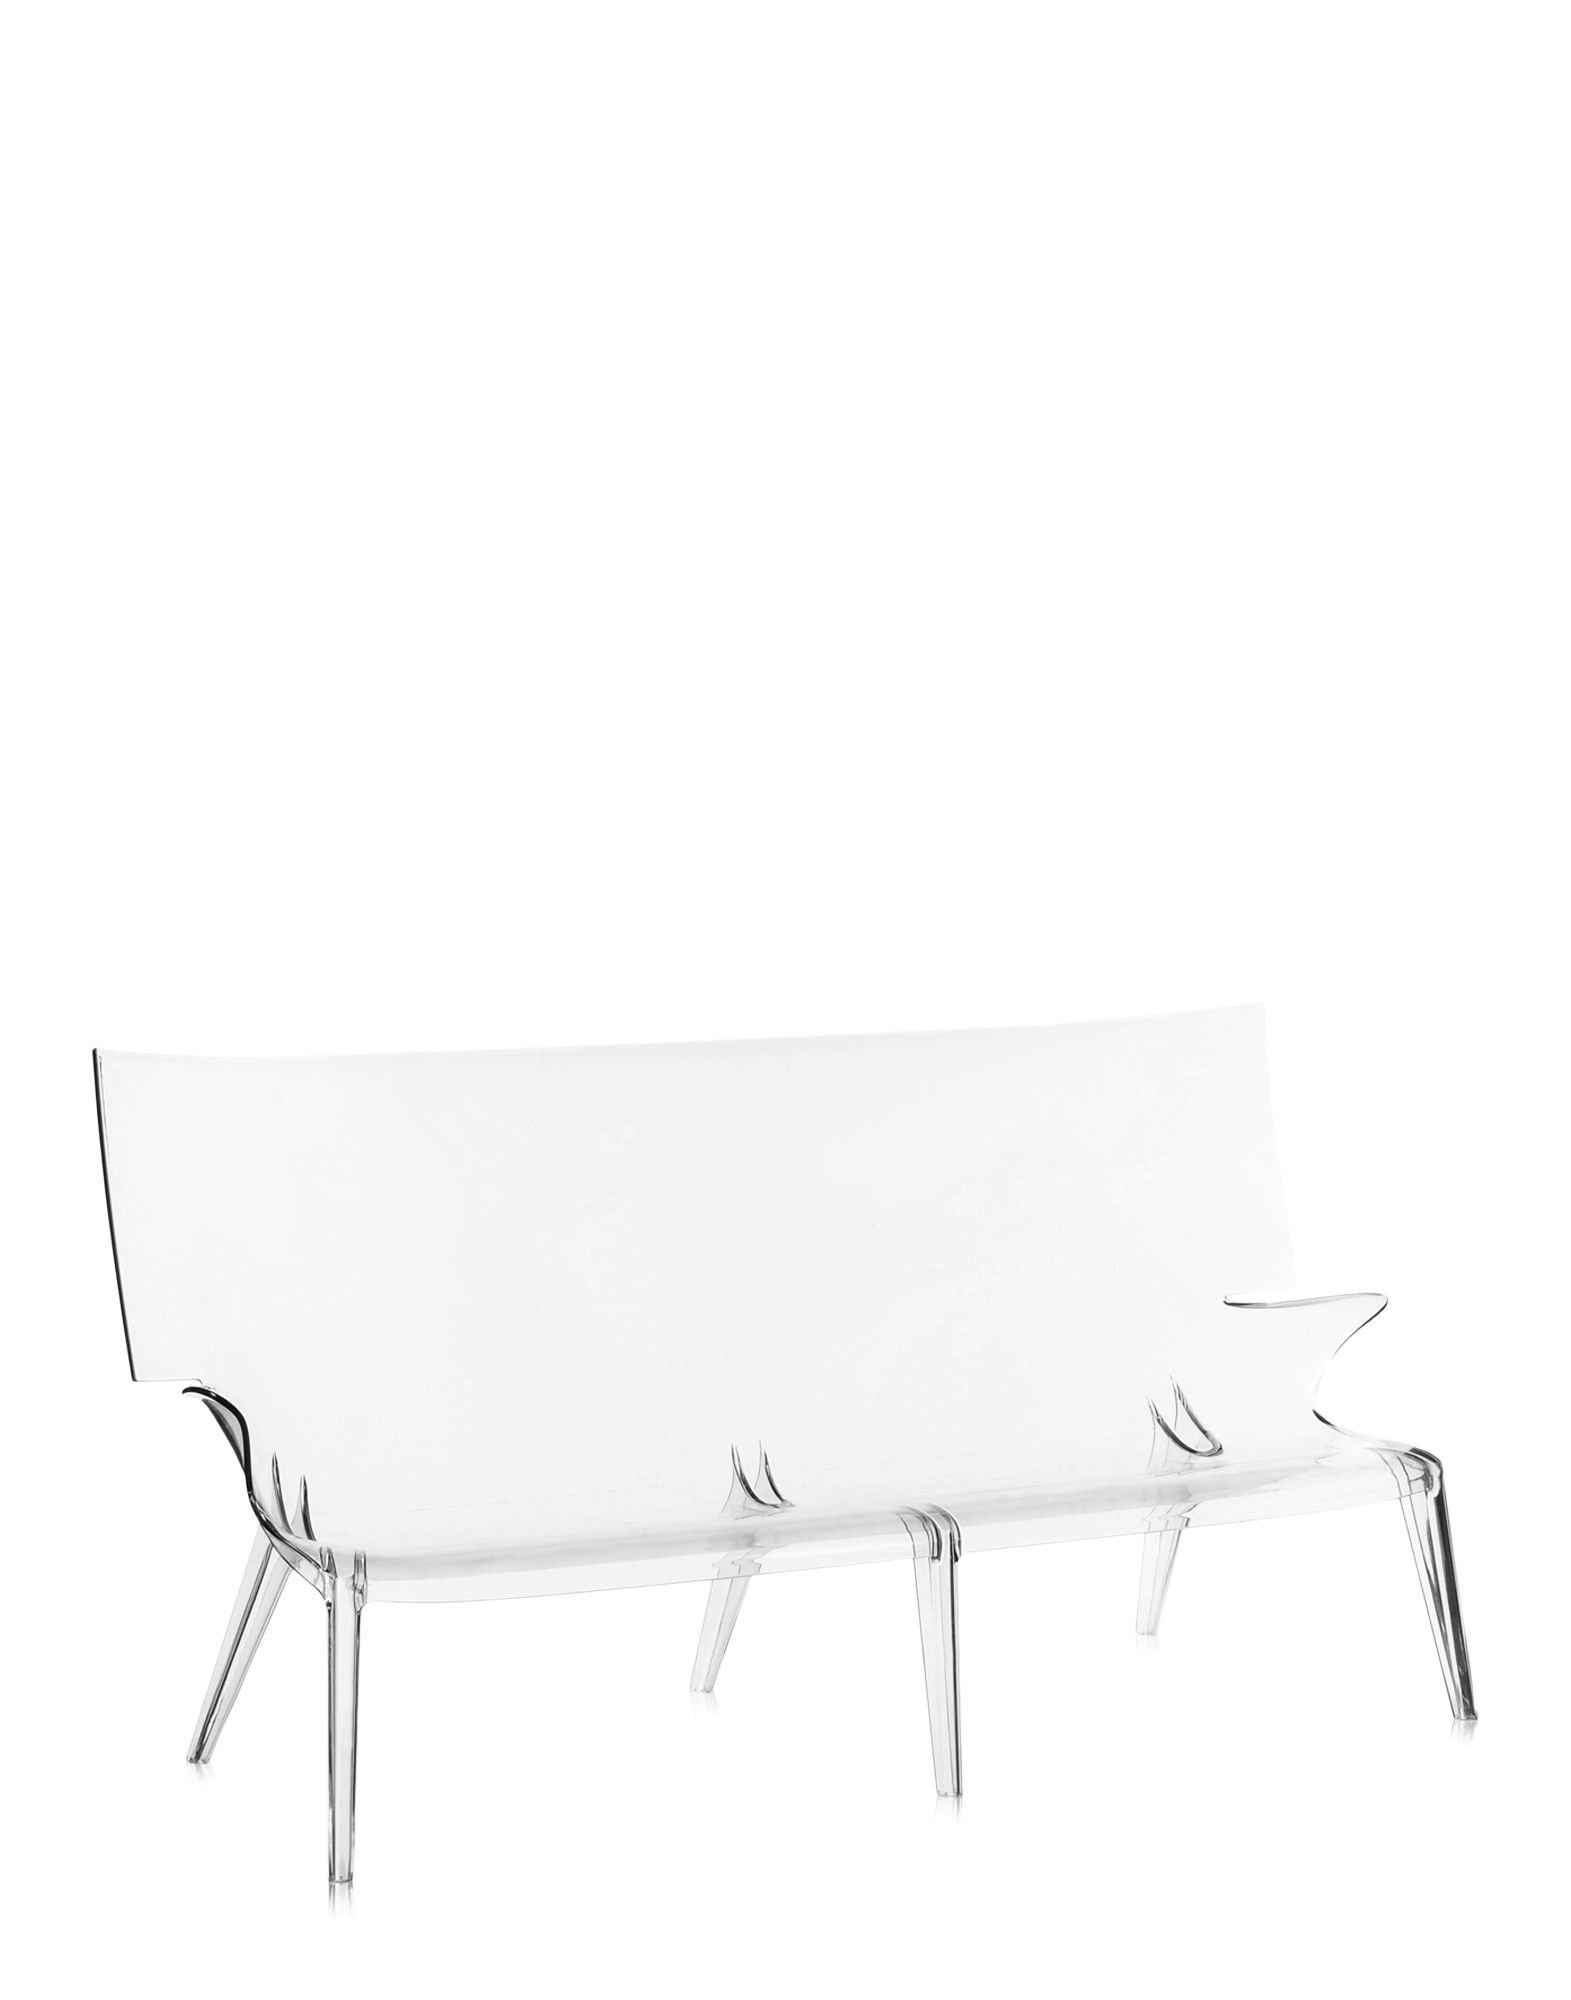 Uncle Jack Sofa from Kartell, designed by Philippe Starck